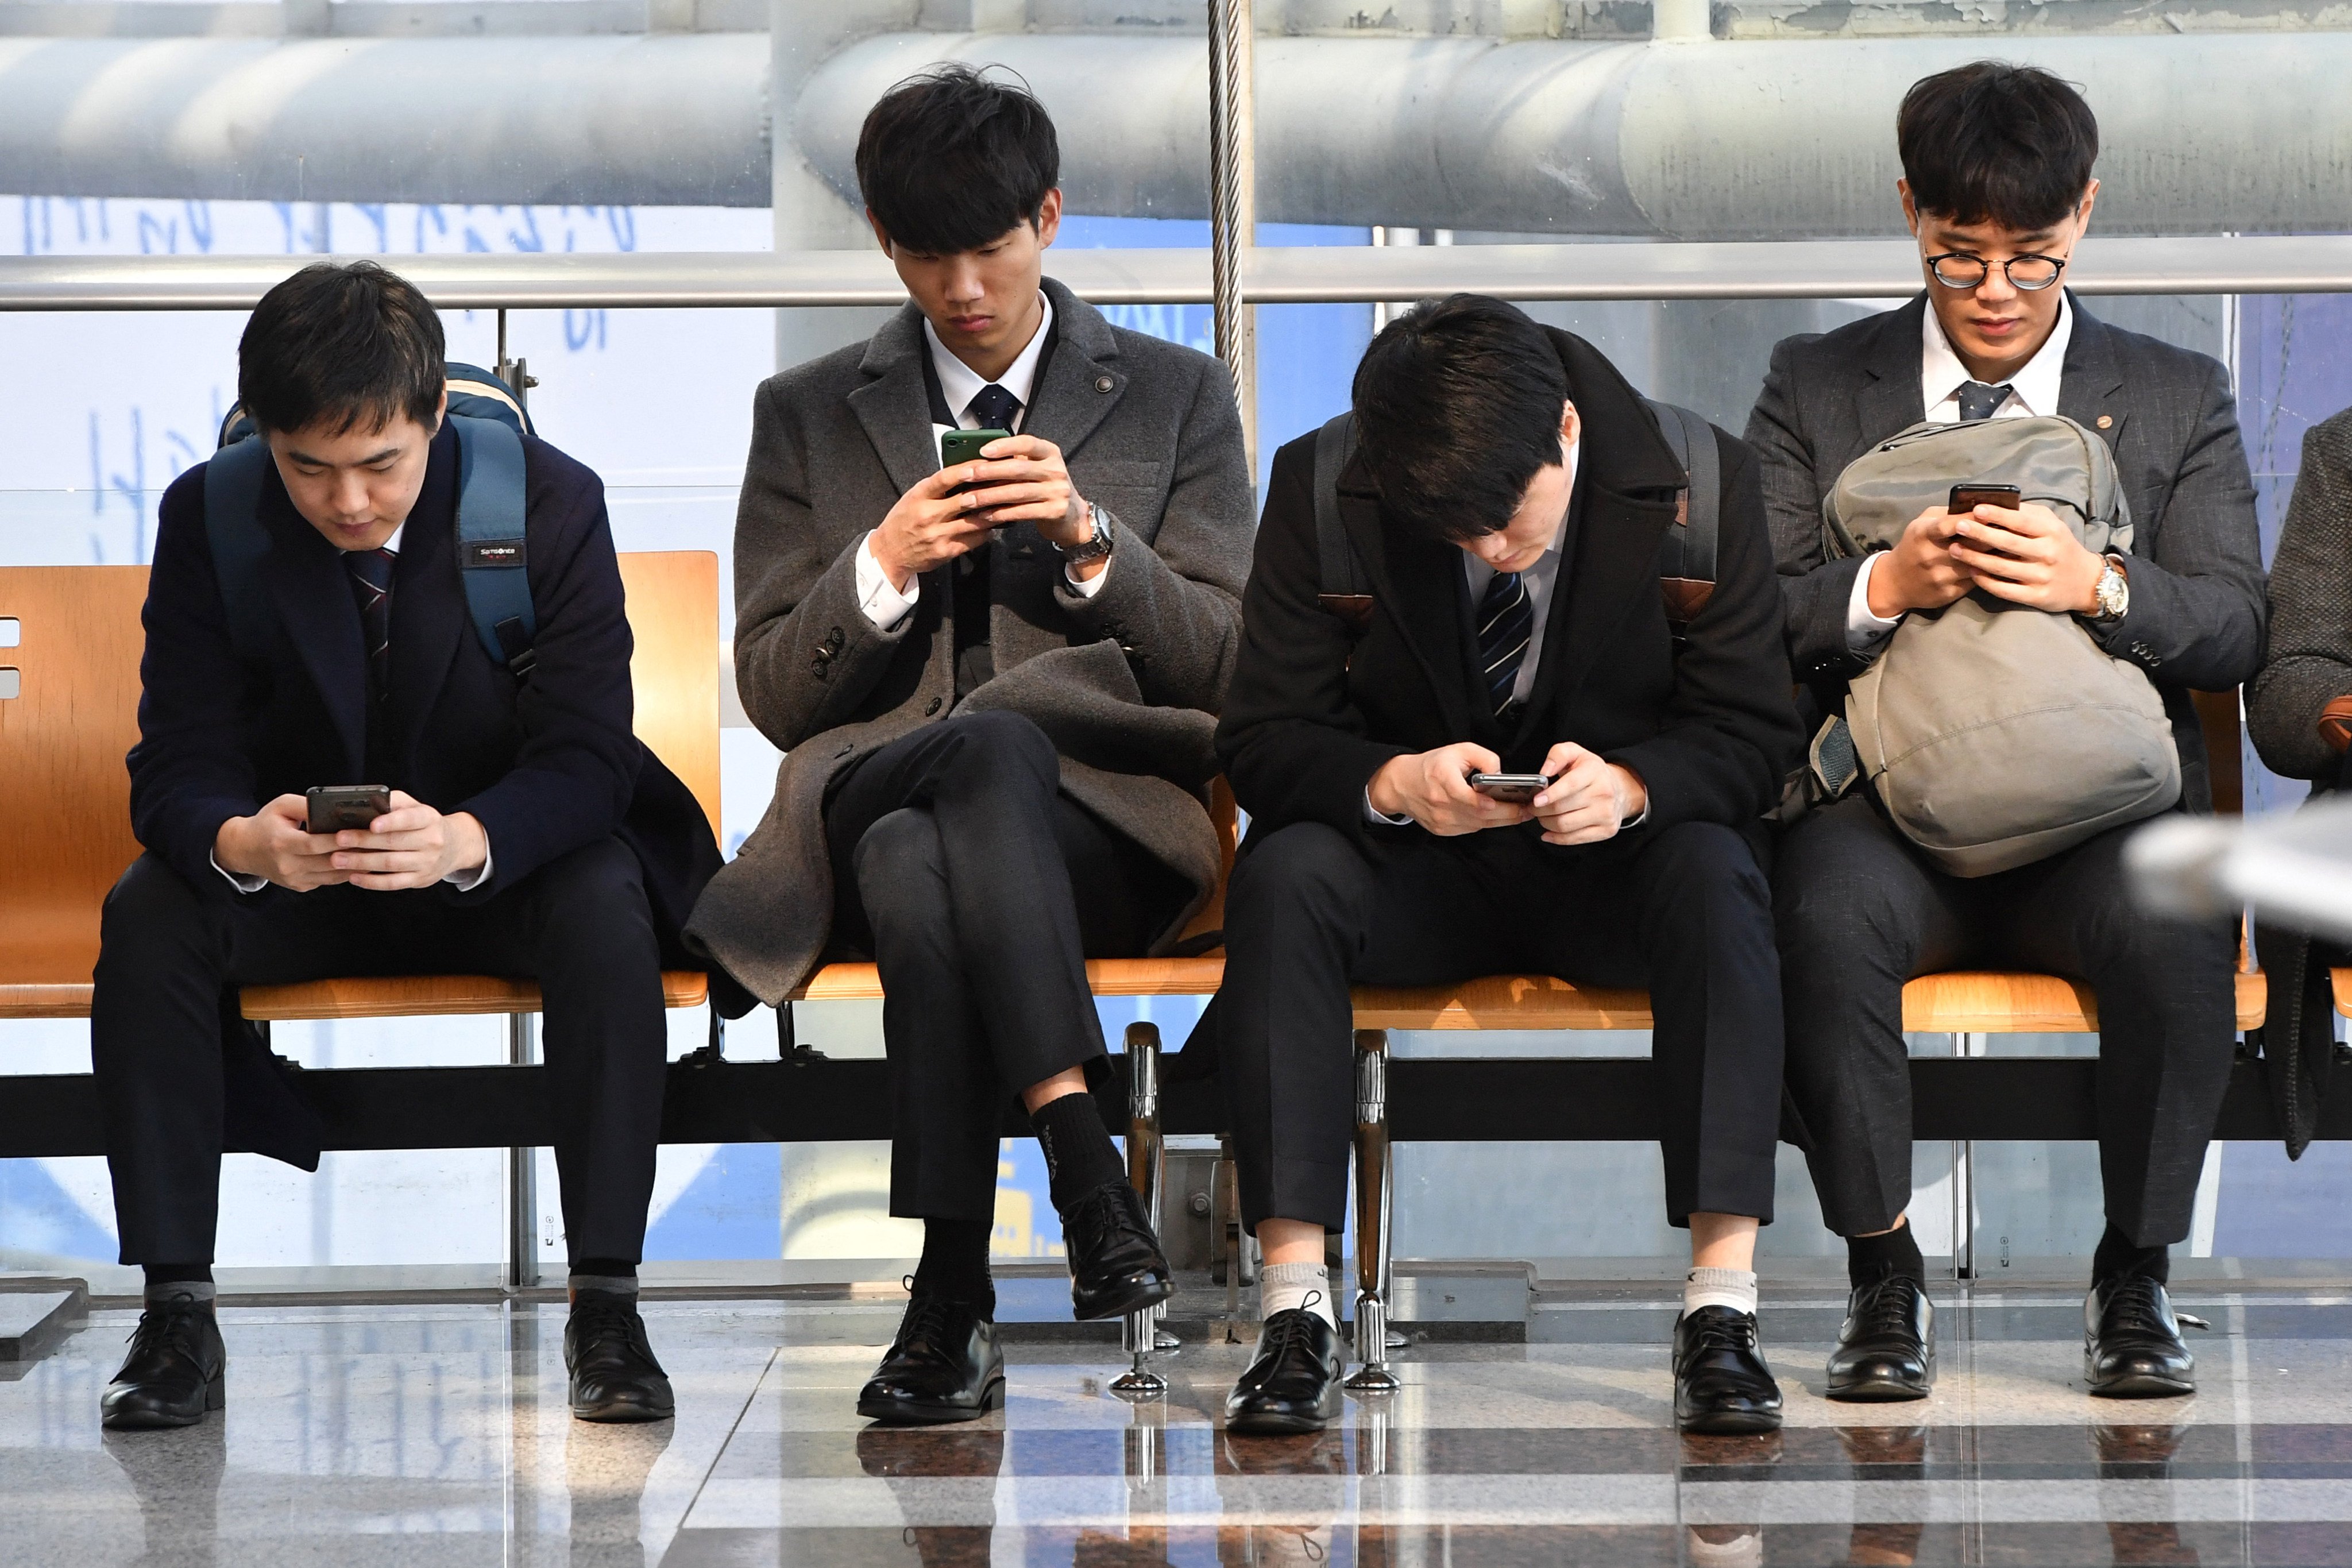 Jobseekers at a jobs fair in Seoul, South Korea. A majority of young adults, whether unemployed or earning too little to support themselves, live with their parents or depend on them for help. Photo: AFP